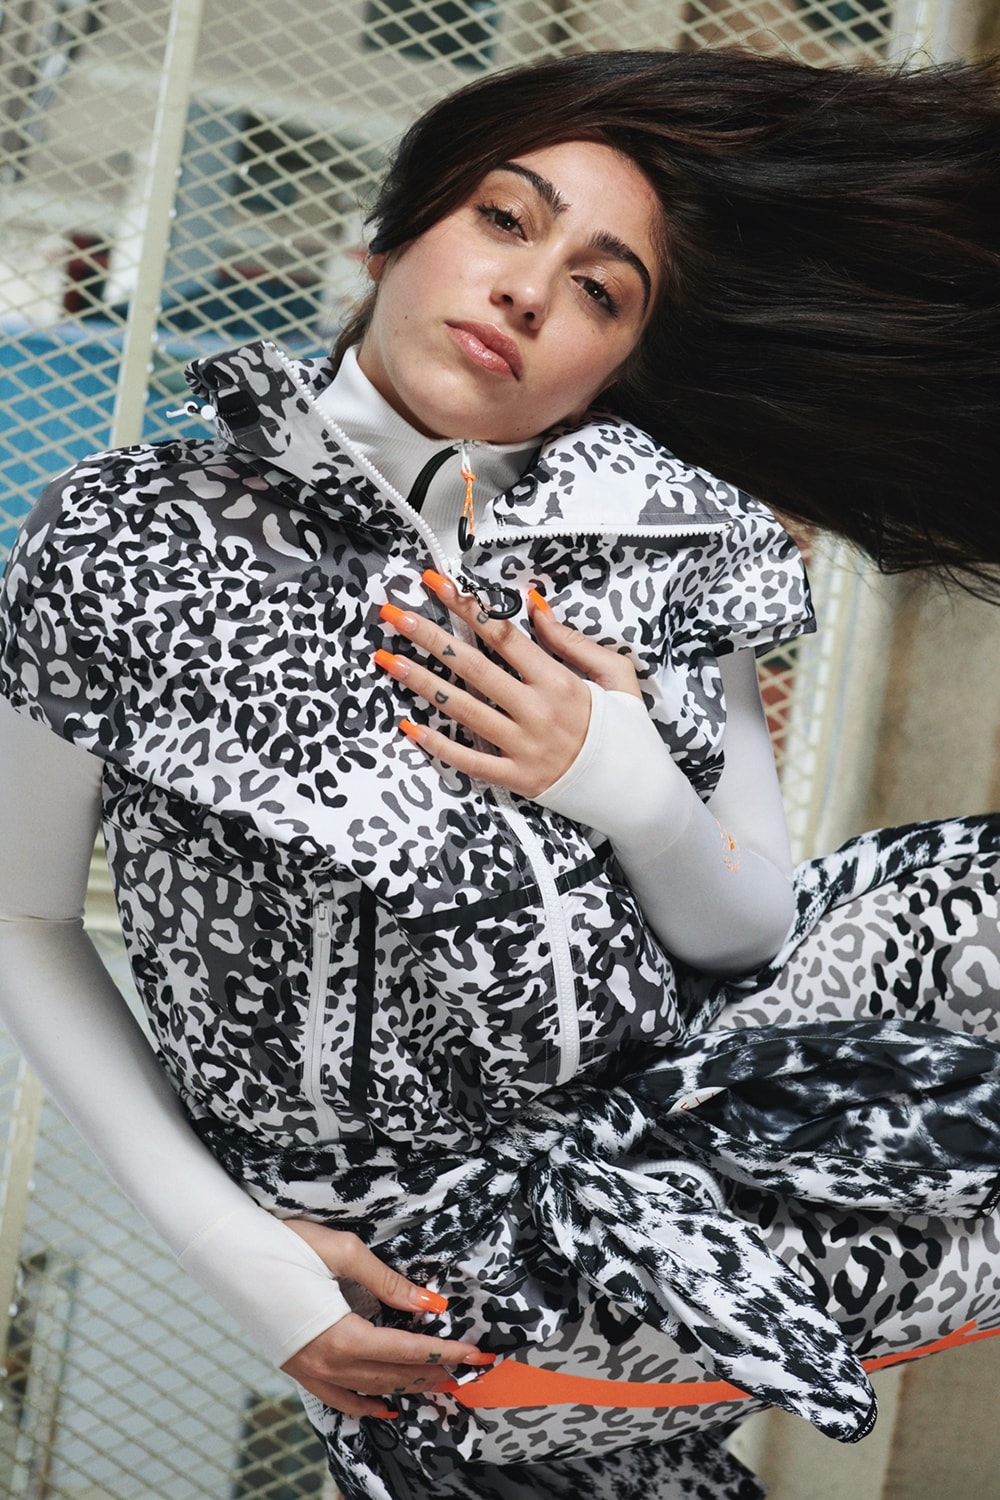 Lourdes Leon is the face of Stella McCartney's new adidas collection